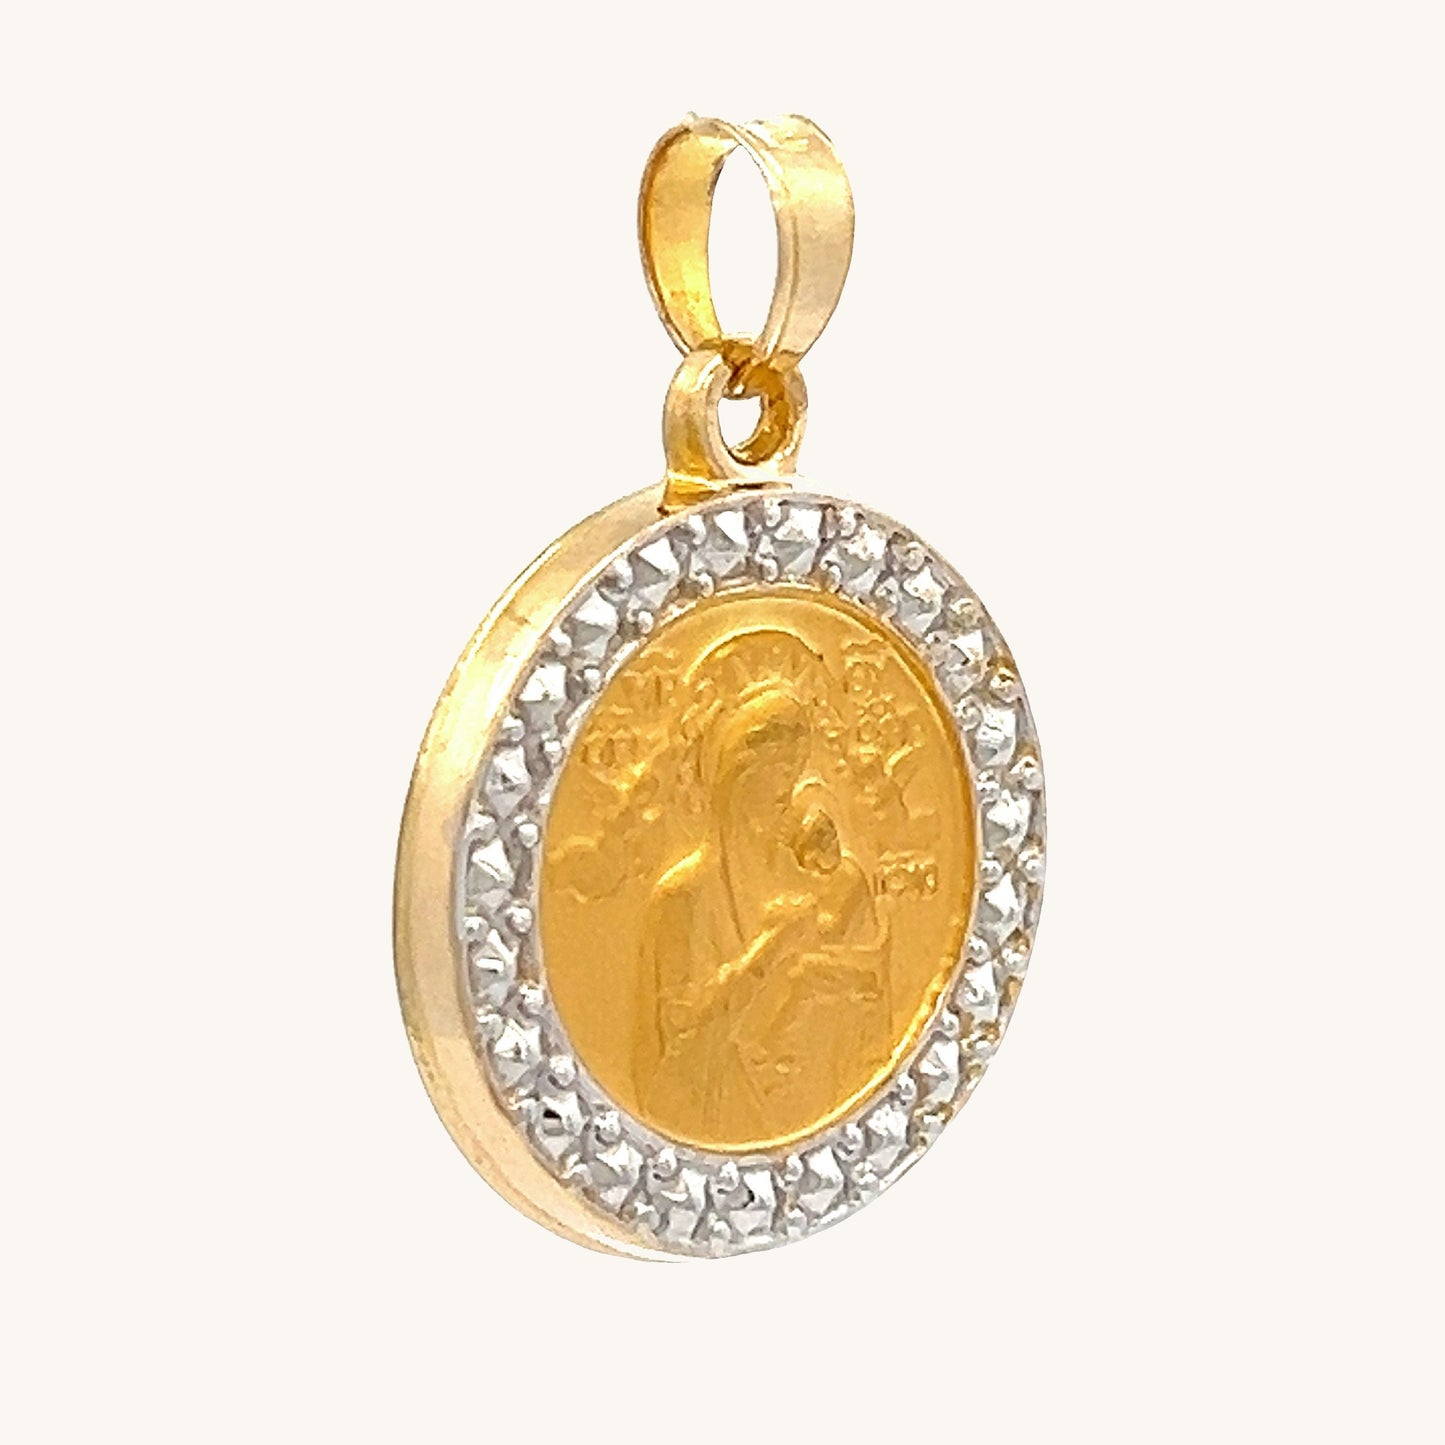 14K Yellow Gold S Perpetual Help Medal